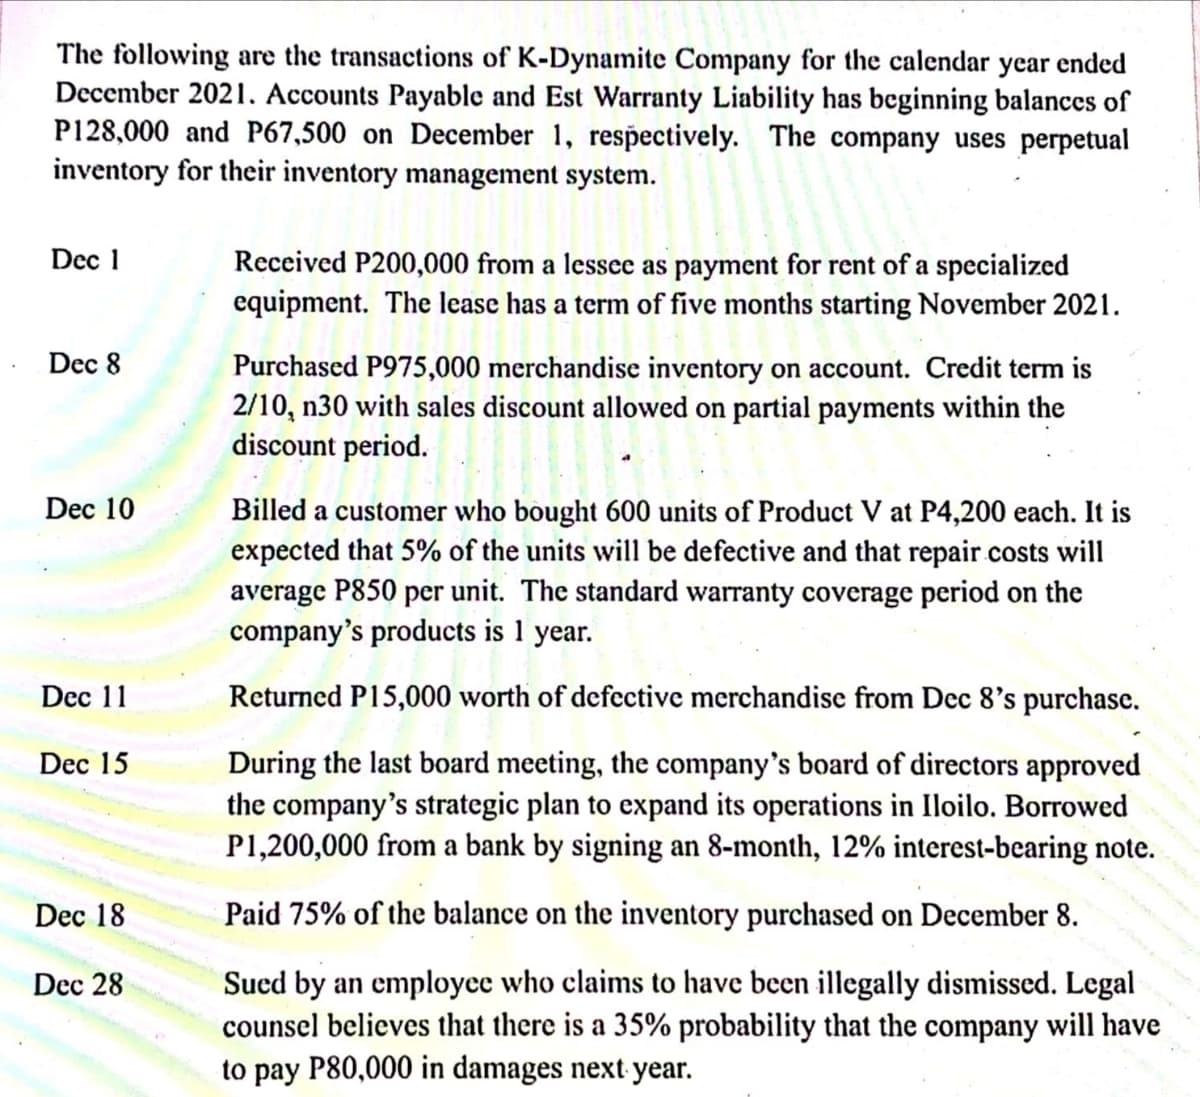 The following are the transactions of K-Dynamite Company for the calendar year ended
December 2021. Accounts Payable and Est Warranty Liability has beginning balances of
P128,000 and P67,500 on December 1, respectively. The company uses perpetual
inventory for their inventory management system.
Dec 1
Received P200,000 from a lessee as payment for rent of a specialized
equipment. The lease has a term of five months starting November 2021.
Dec 8
Purchased P975,000 merchandise inventory on account. Credit term is
2/10, n30 with sales discount allowed on partial payments within the
discount period.
Dec 10
Billed a customer who bought 600 units of Product V at P4,200 each. It is
expected that 5% of the units will be defective and that repair costs will
average P850 per unit. The standard warranty coverage period on the
company's products is 1 year.
Dec 11
Returned P15,000 worth of defective merchandise from Dec 8's purchase.
During the last board meeting, the company's board of directors approved
the company's strategic plan to expand its operations in Iloilo. Borrowed
P1,200,000 from a bank by signing an 8-month, 12% interest-bearing note.
Dec 15
Dec 18
Paid 75% of the balance on the inventory purchased on December 8.
Sucd by an employce who claims to have been illegally dismissed. Legal
counsel believes that there is a 35% probability that the company will have
to pay P80,000 in damages next year.
Dec 28
